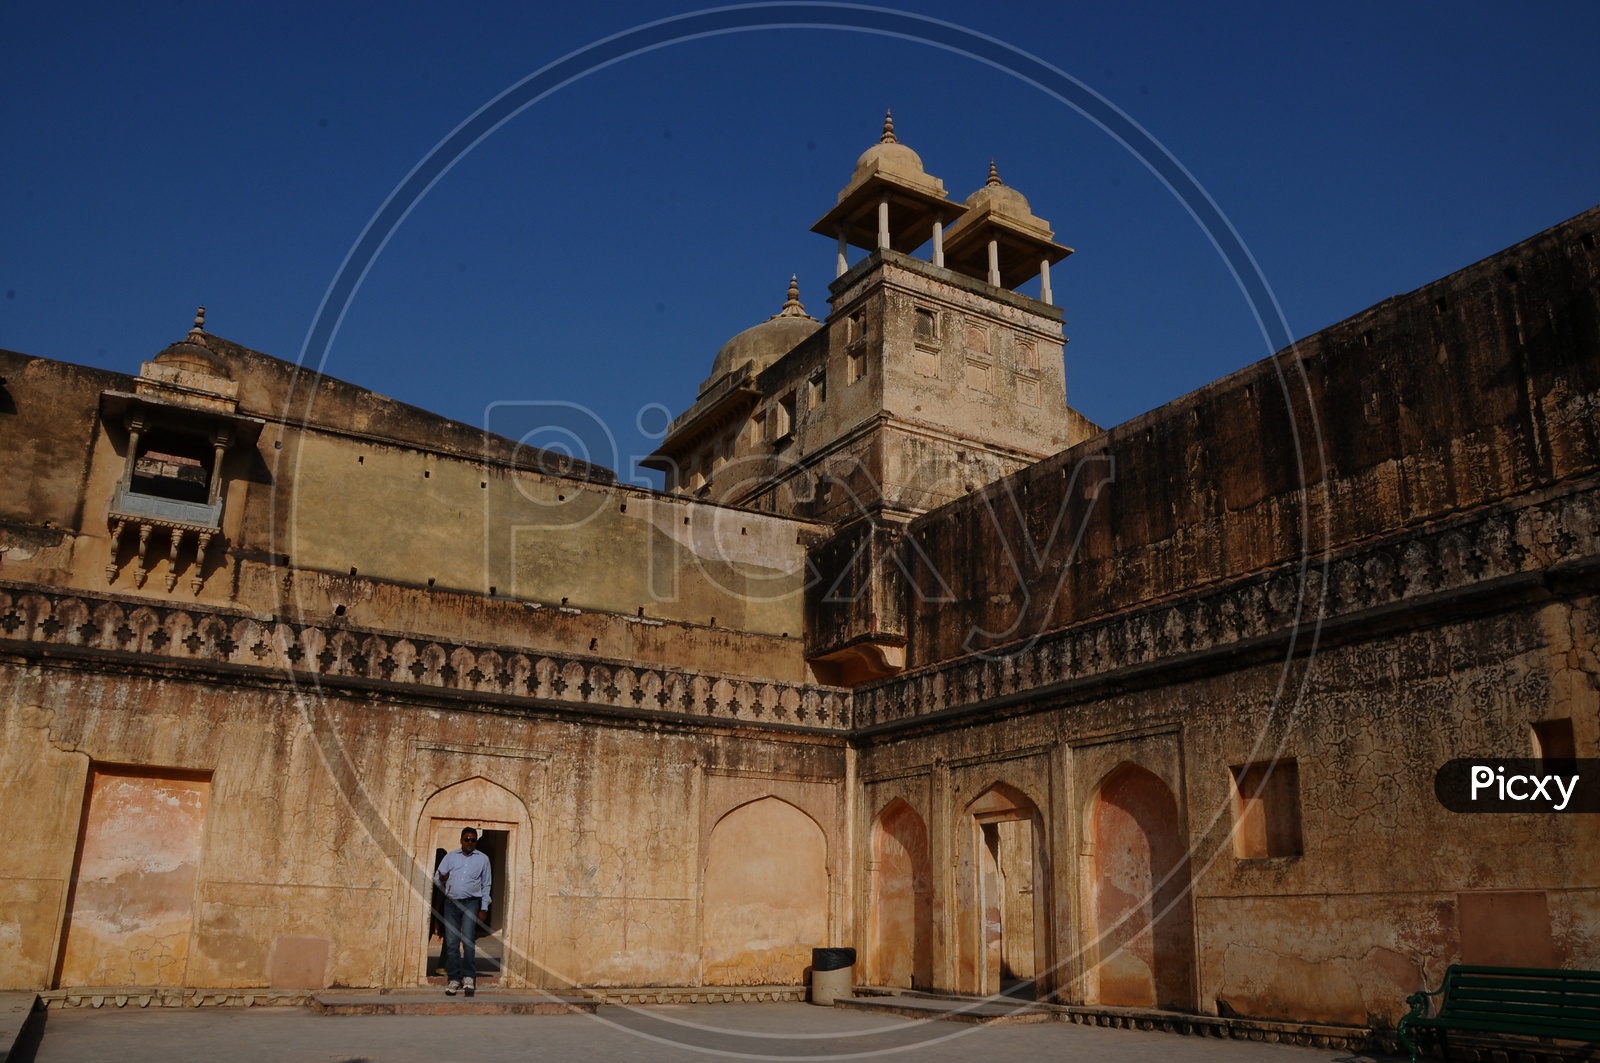 Architecture Of Amer Fort in Jaipur